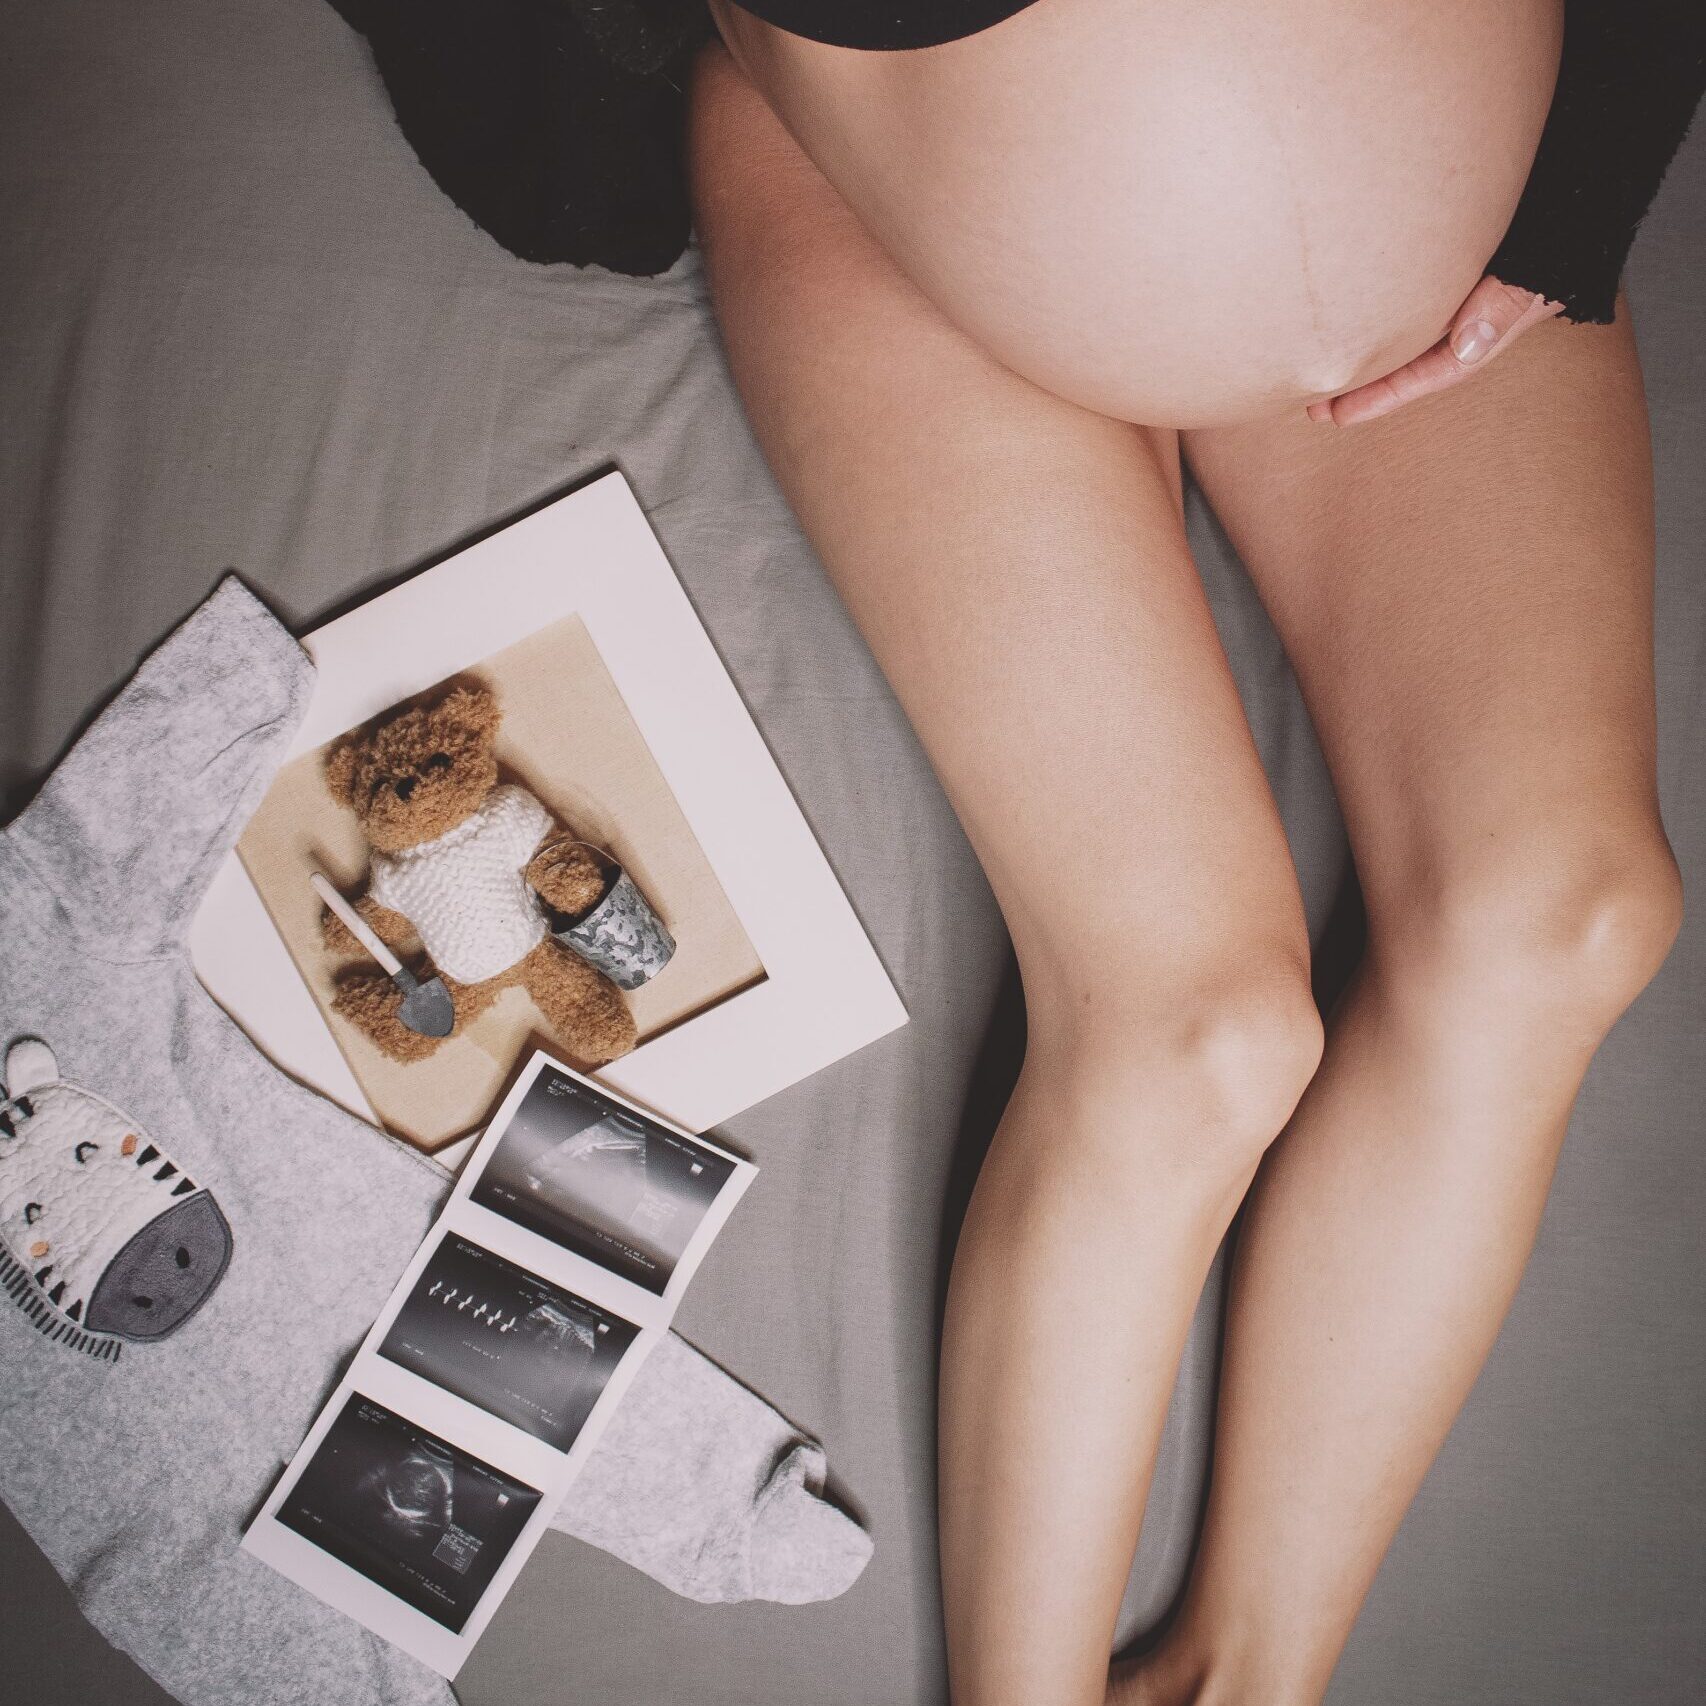 Pregnant woman with baby photos